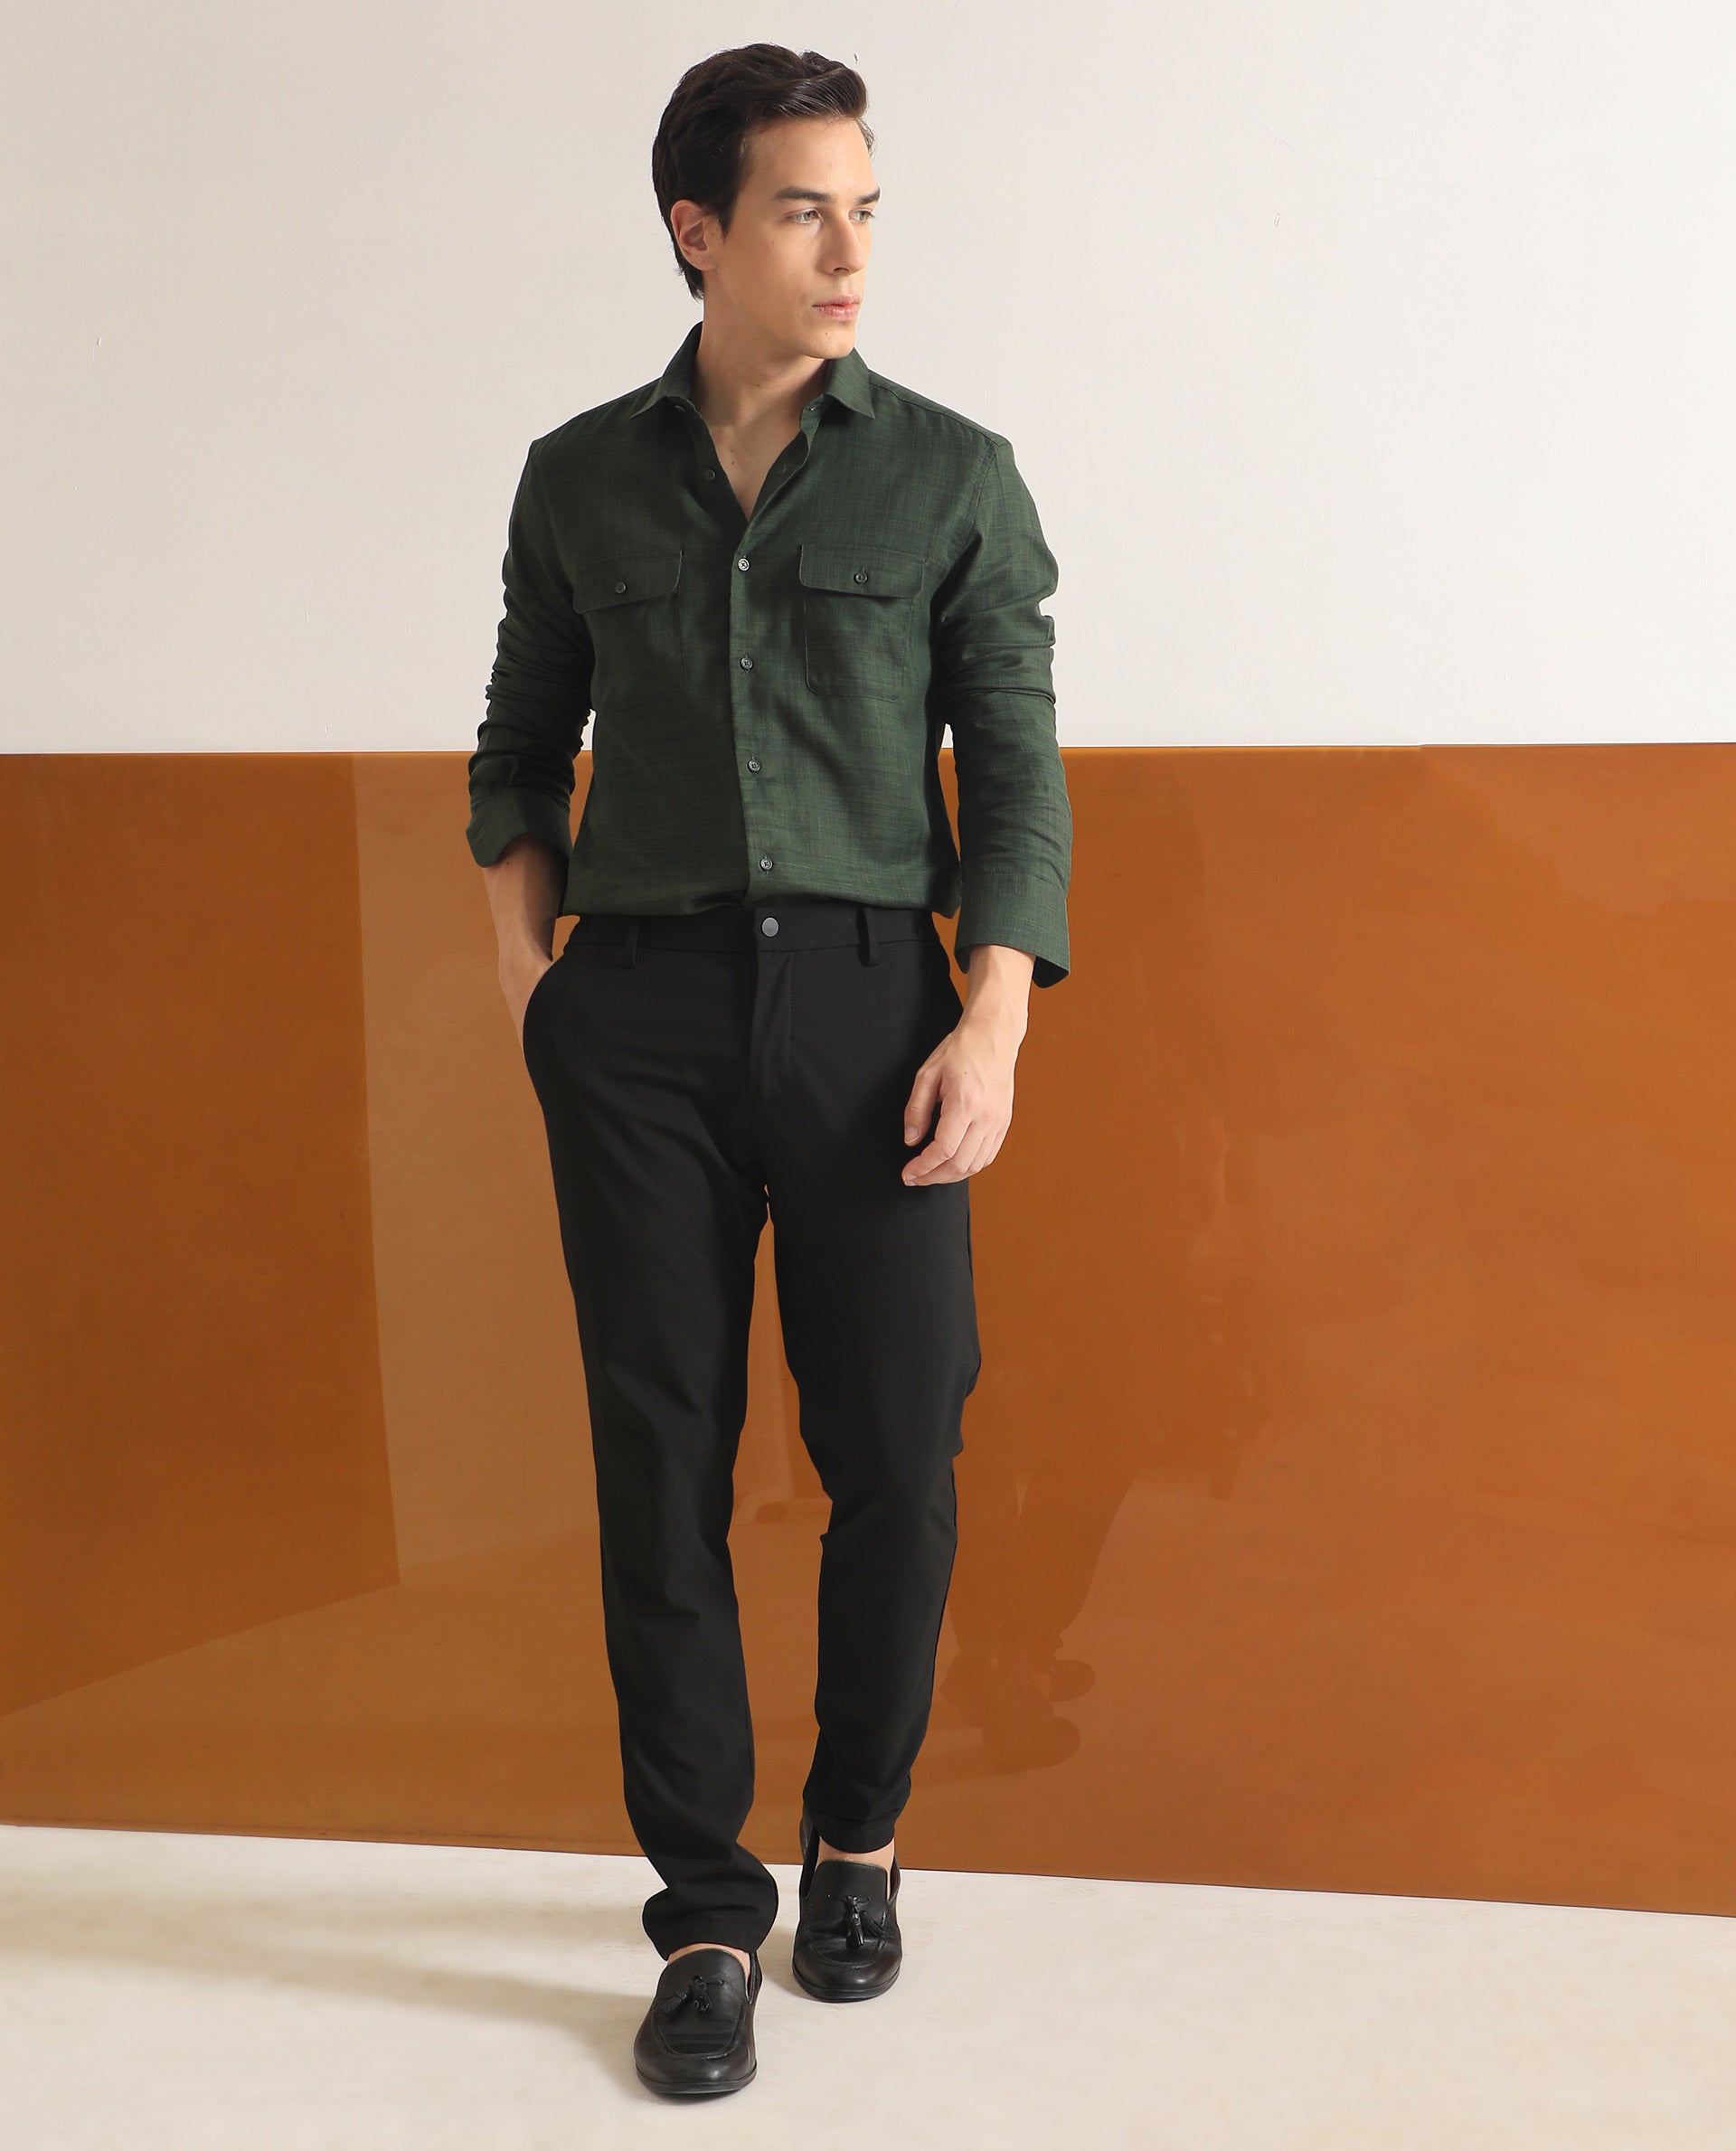 What Color Shirt To Wear With Olive Green Pants